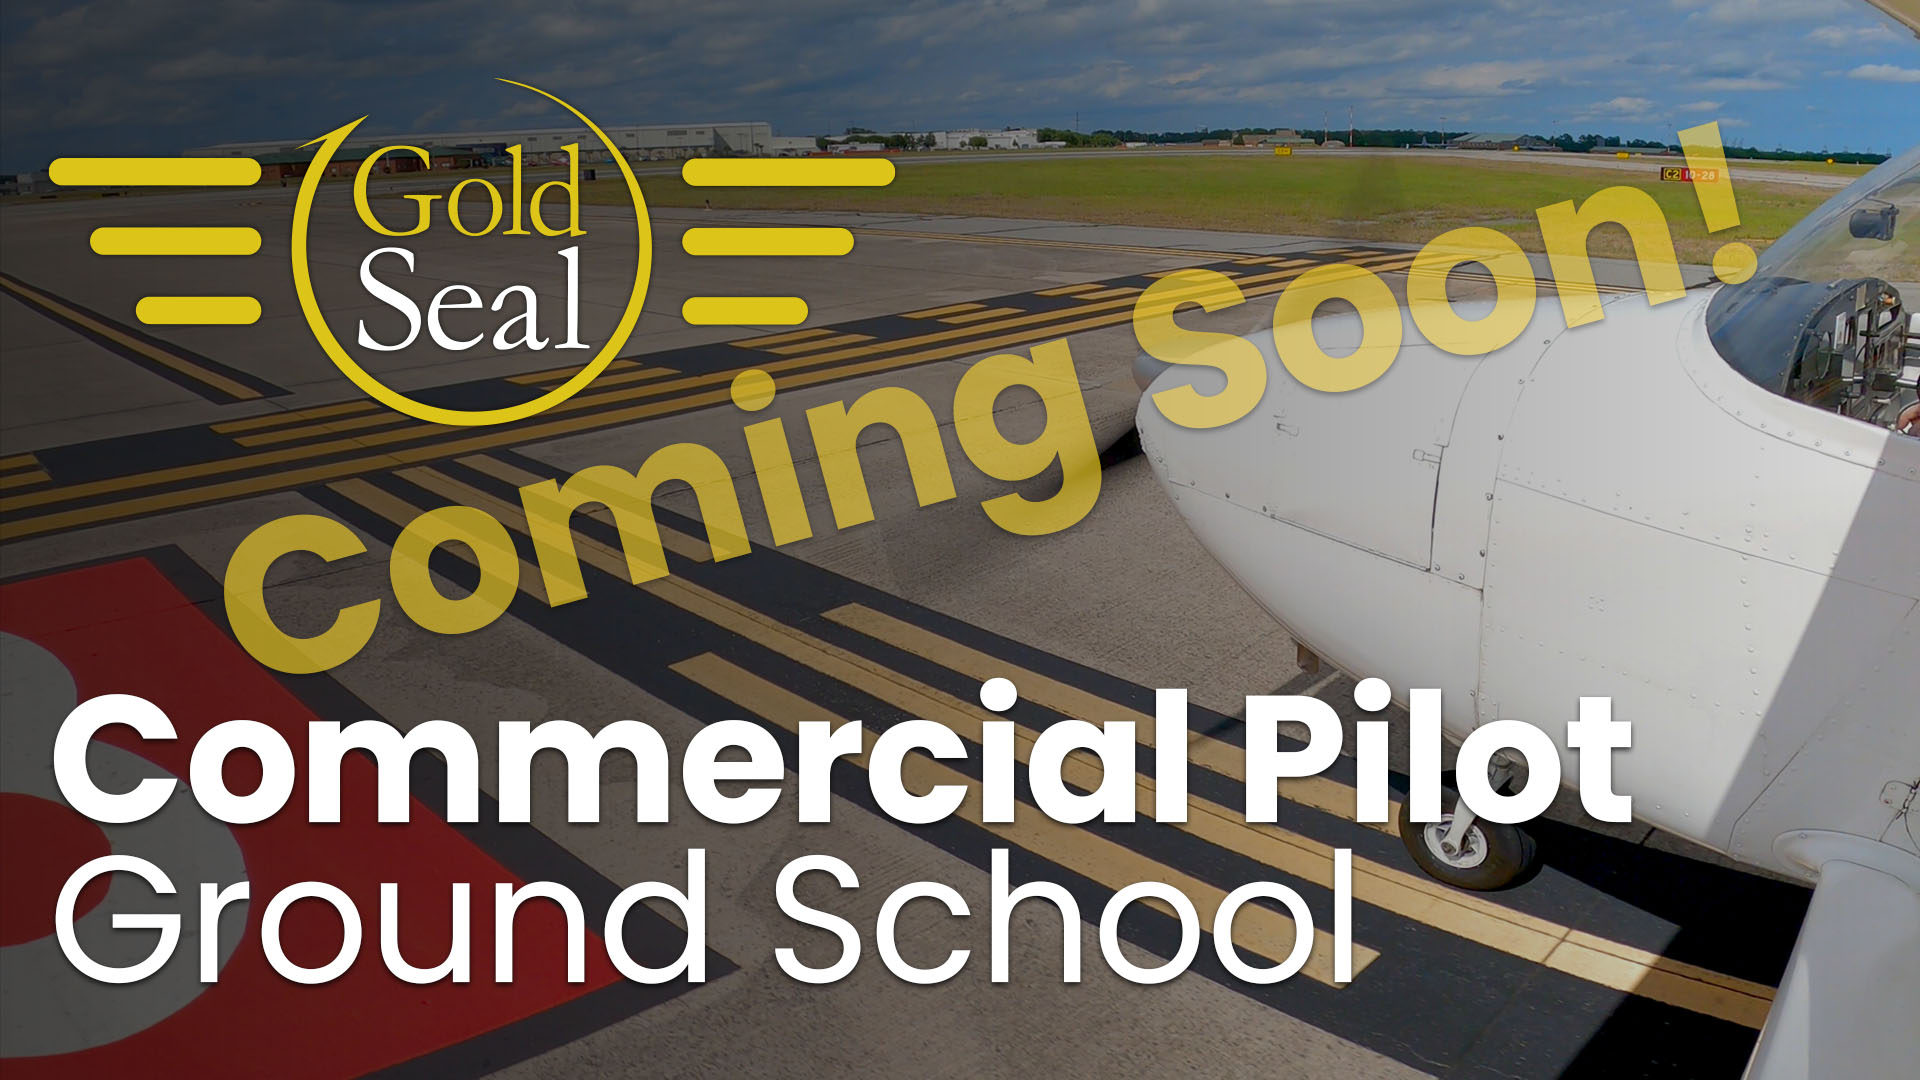 Gold Seal Commercial Pilot Ground School Coming Soon